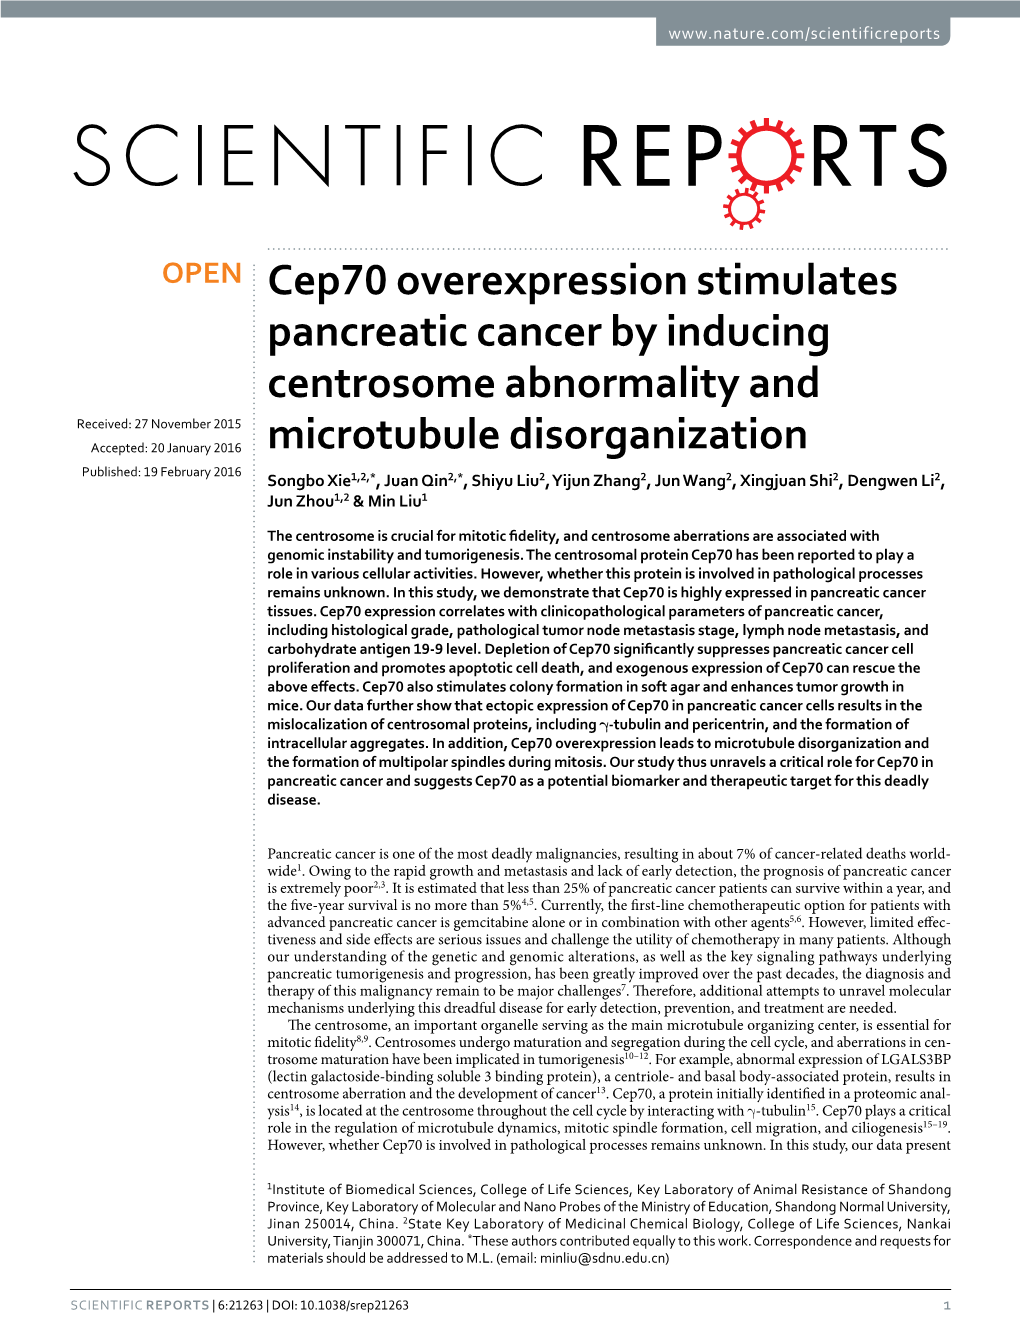 Cep70 Overexpression Stimulates Pancreatic Cancer by Inducing